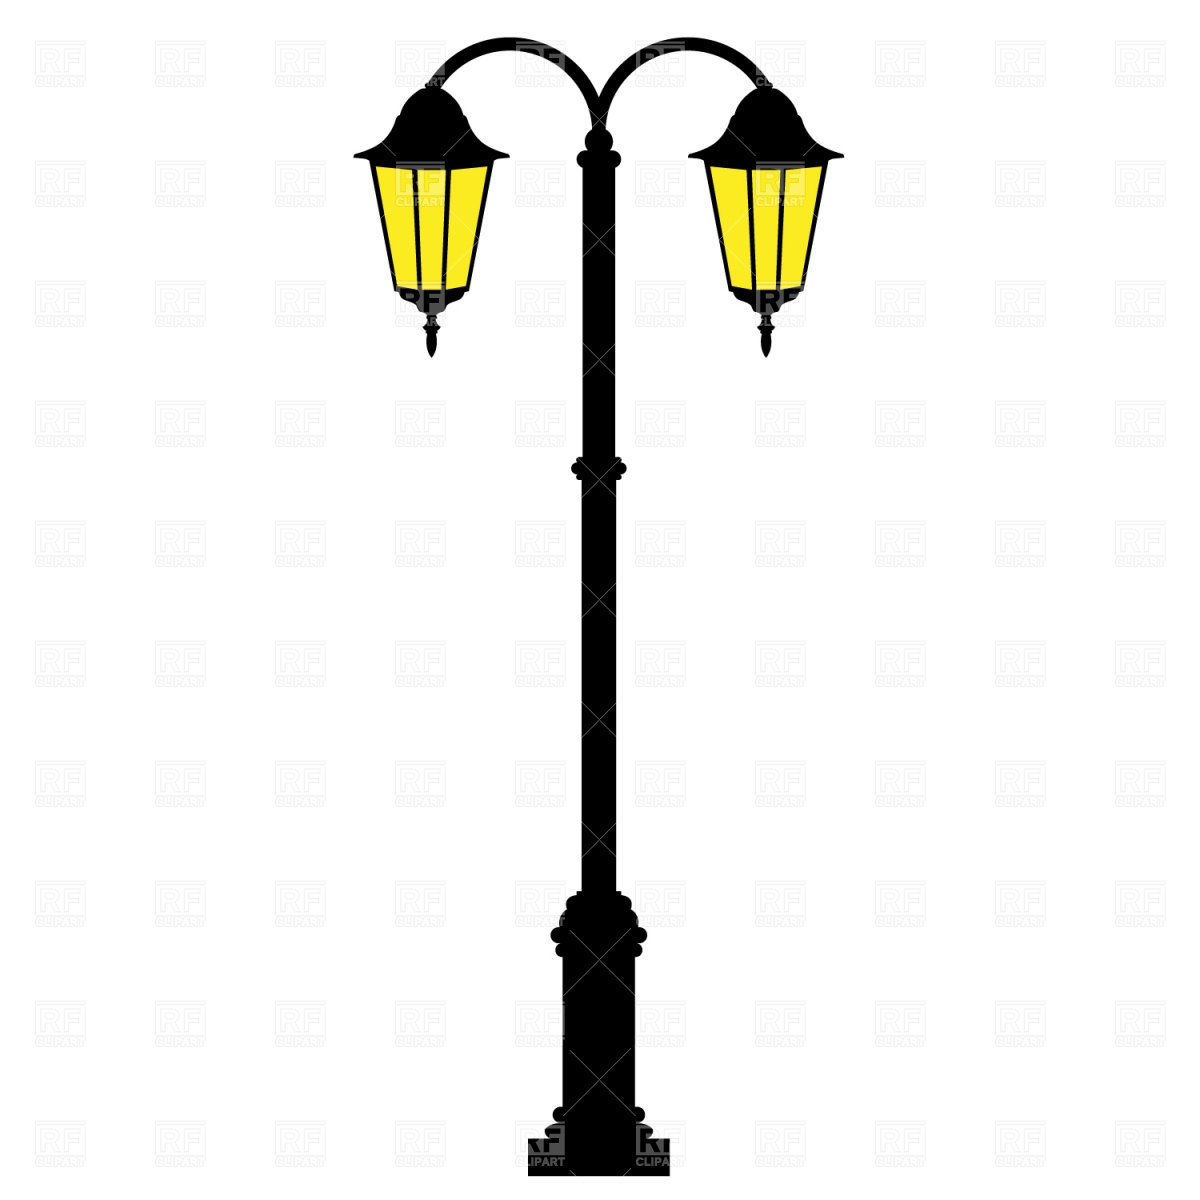 Lamp pole clipart - Clipground